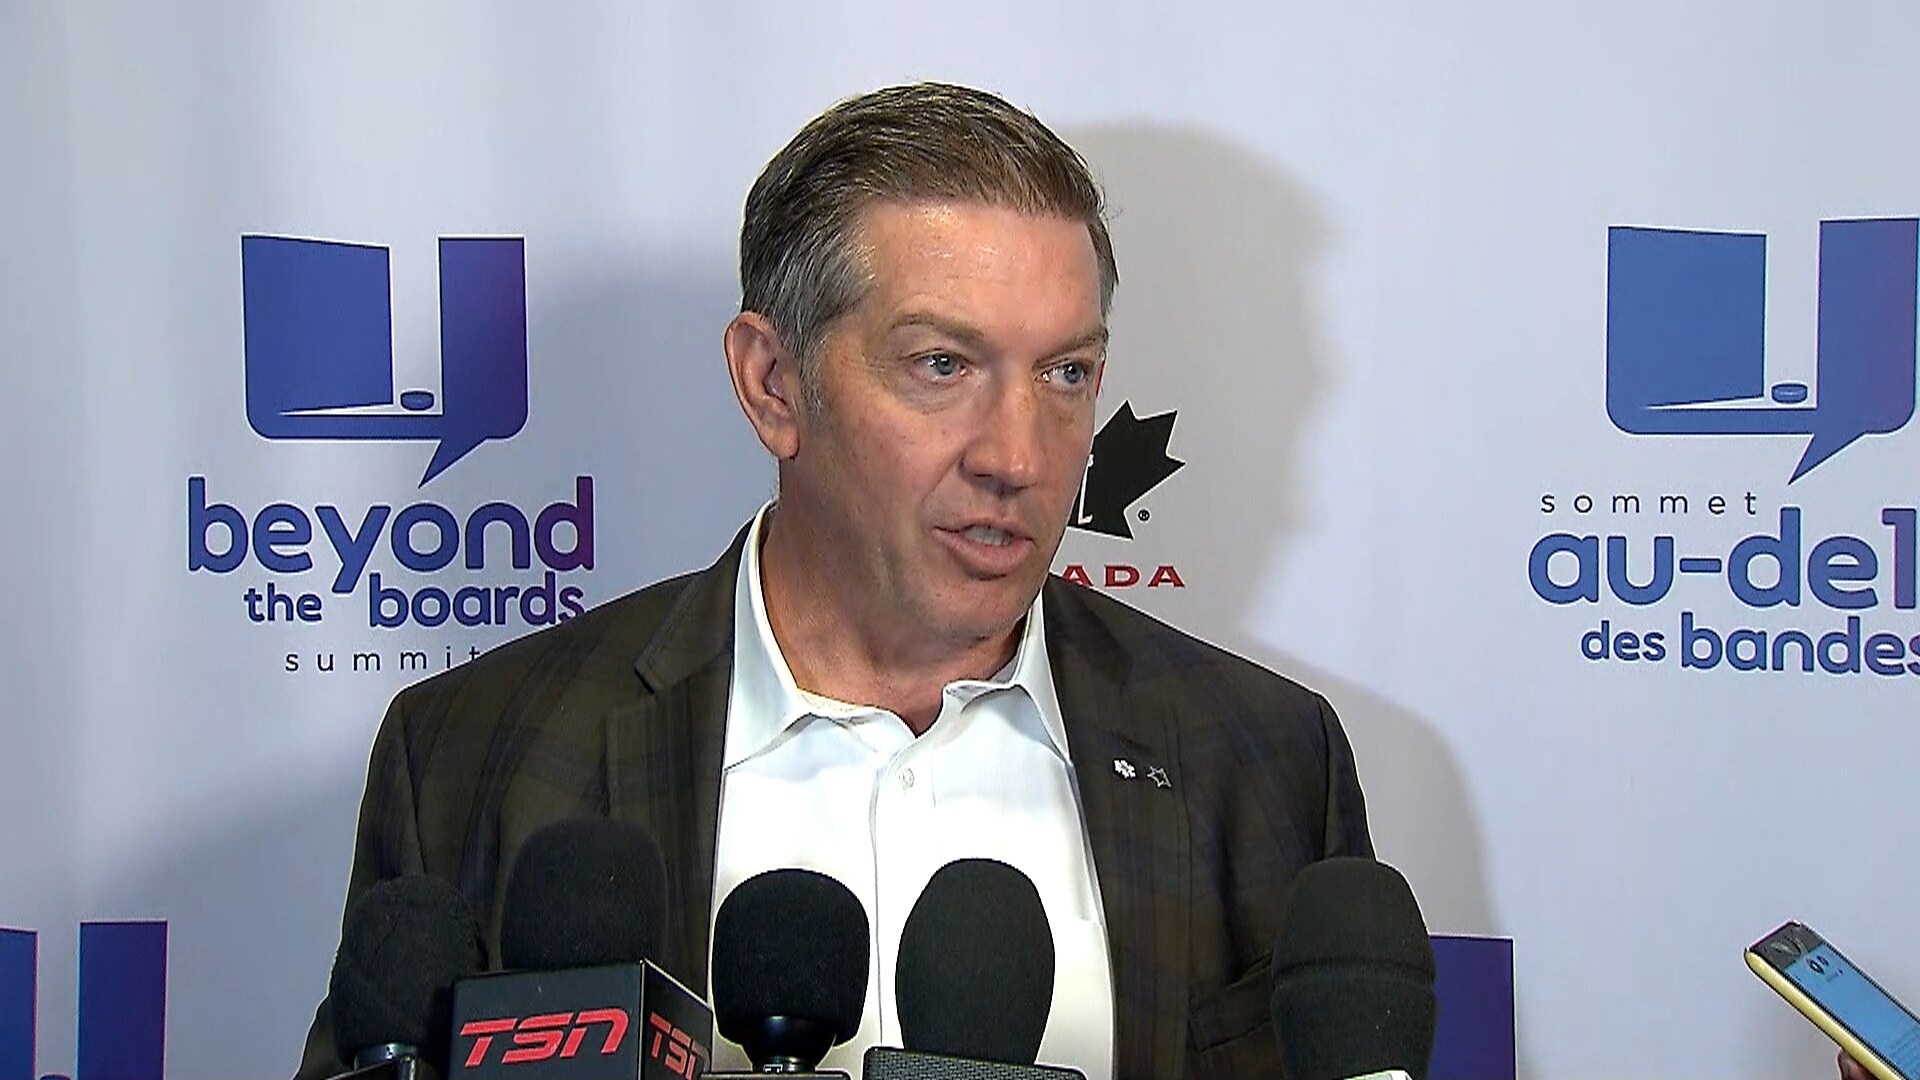 Kennedy calls for commitment because culture change in hockey wont happen overnight